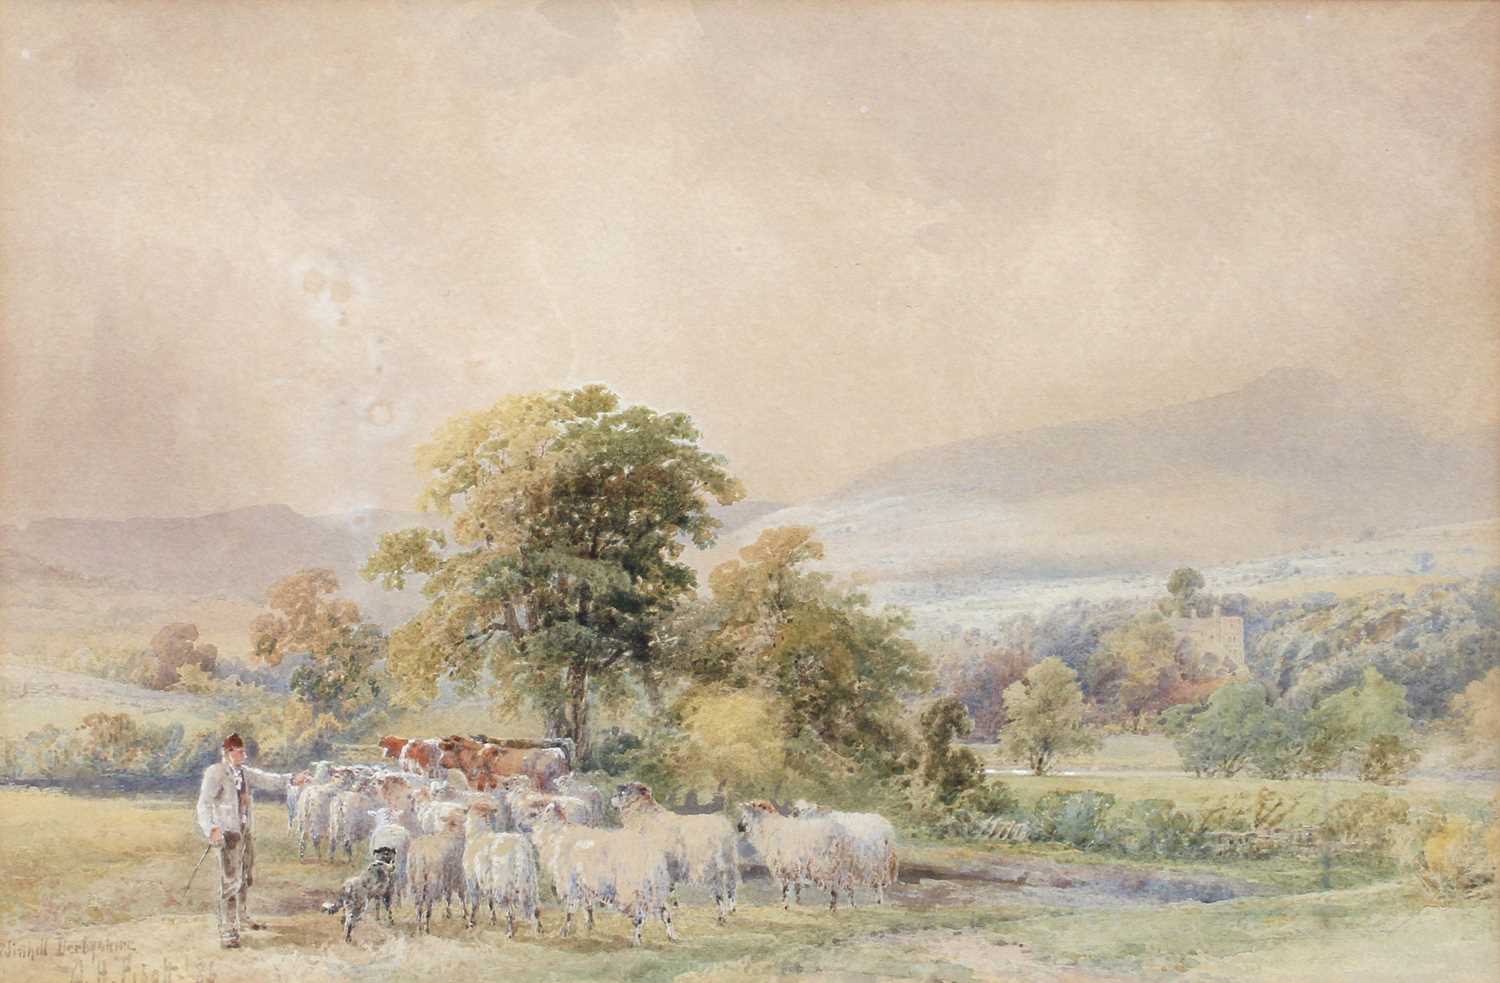 William Henry Pigott (1810-1901) "Winhill Derbyshire" Signed, inscribed and dated (18)86,